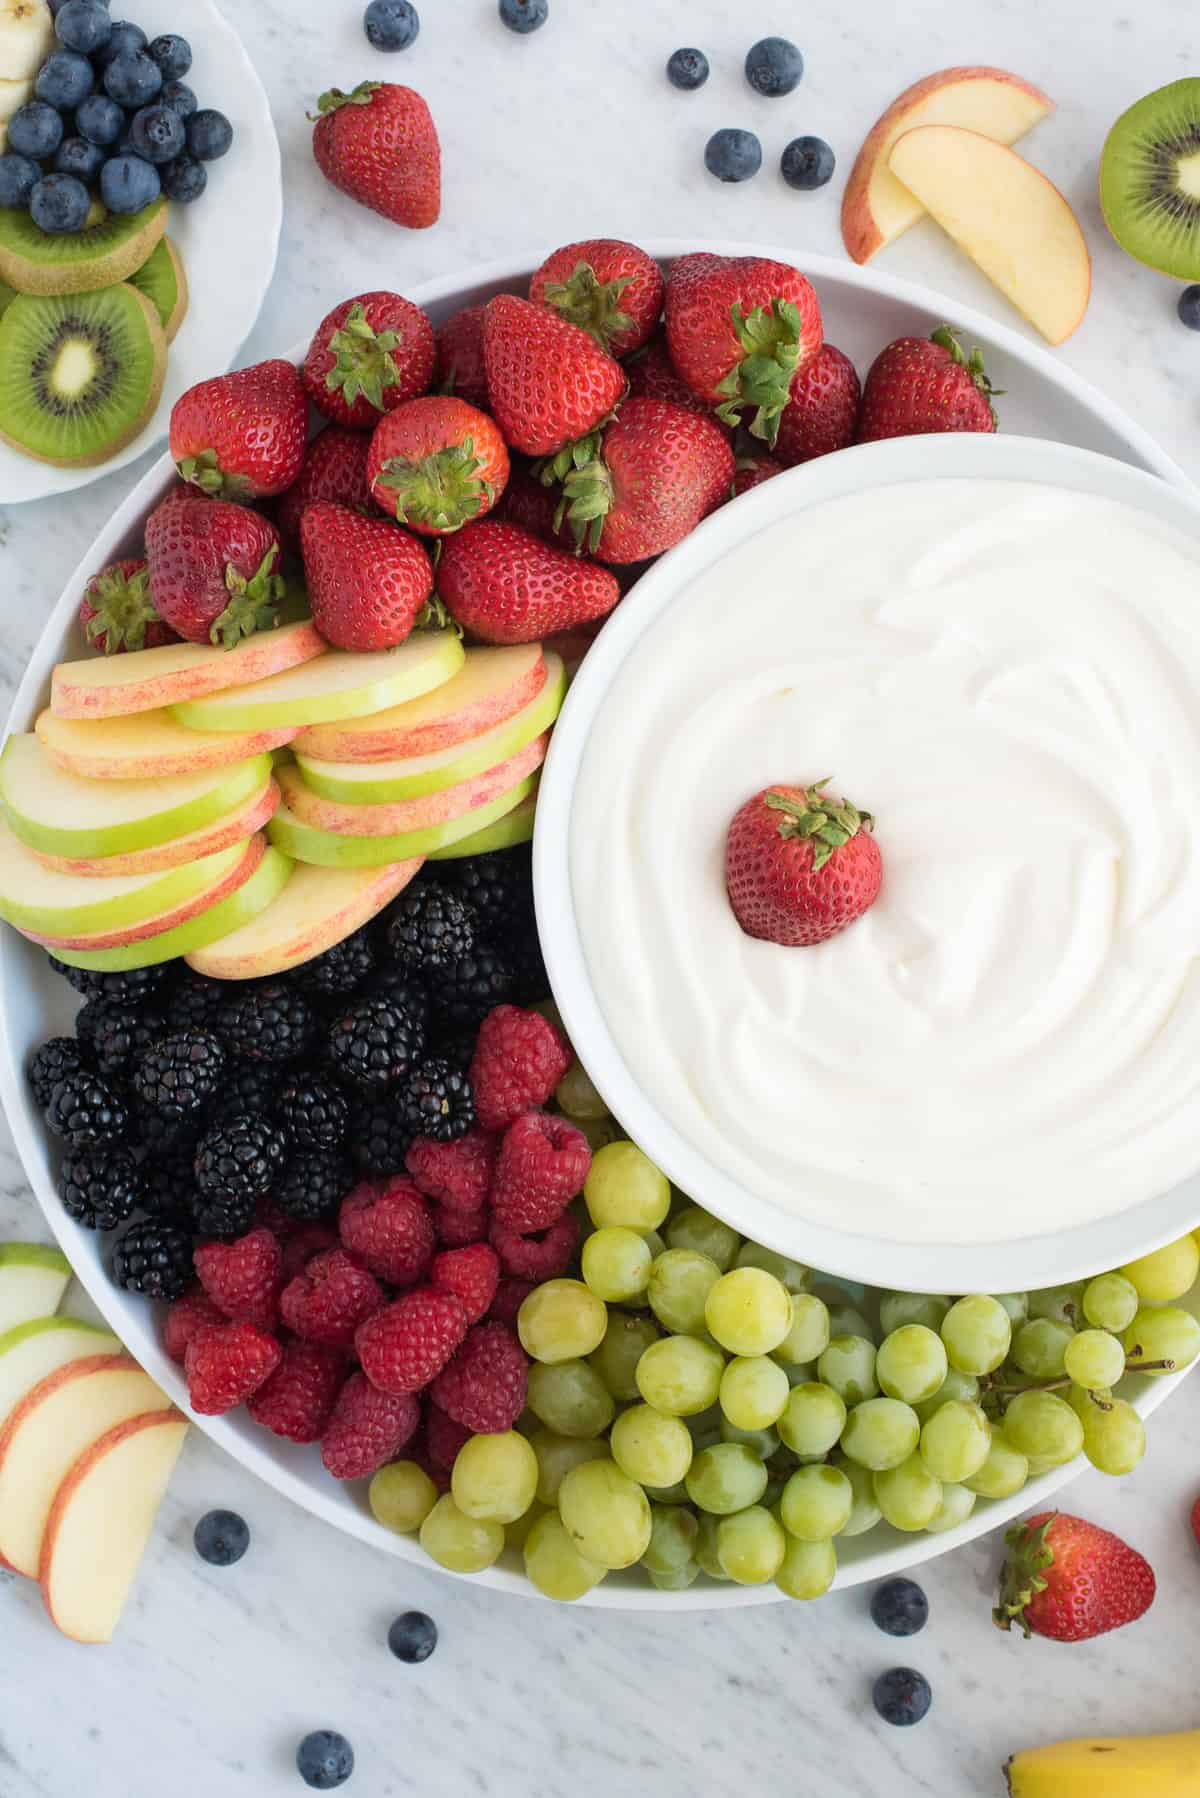 round platter filled with strawberries, apples, blackberries, raspberries and grapes with a bowl of white fruit dip 